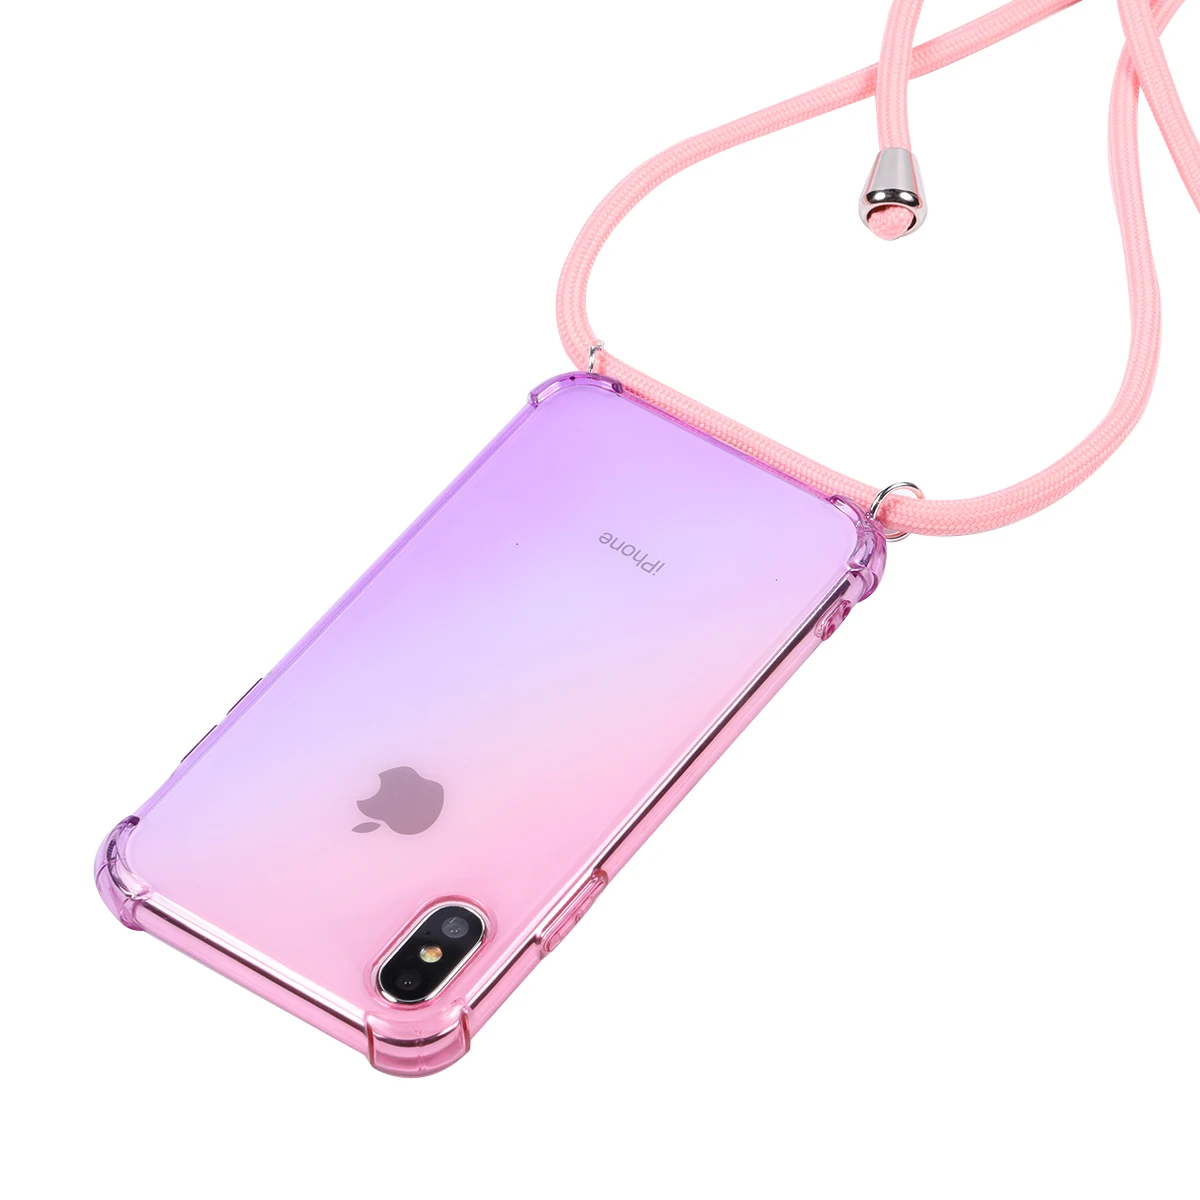 

lanyard Rainbow aurora transparent case for Samsung Galaxy S10 S10E S9 S8 plus S7 Edge note 10 9 8 shoulder rope cord cover